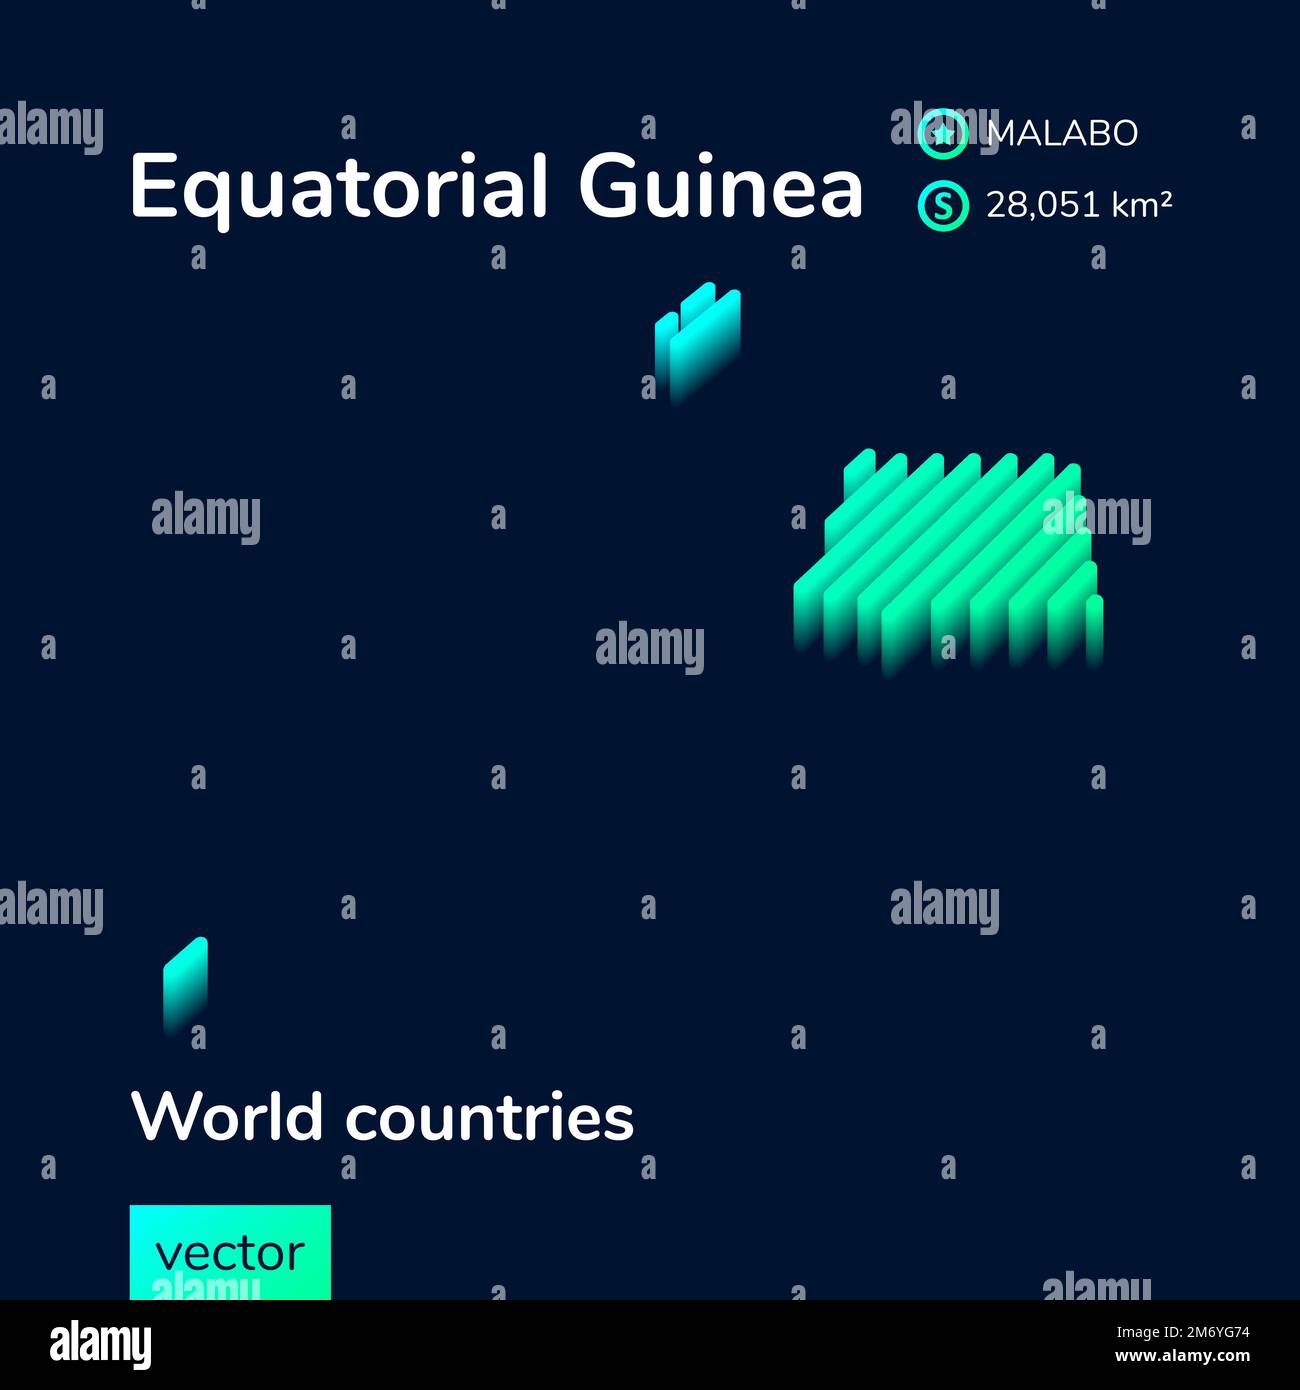 Equatorial Guinea 3D map. Stylized striped vector isometric map is in neon green and mint colors on the dark blue background Stock Vector